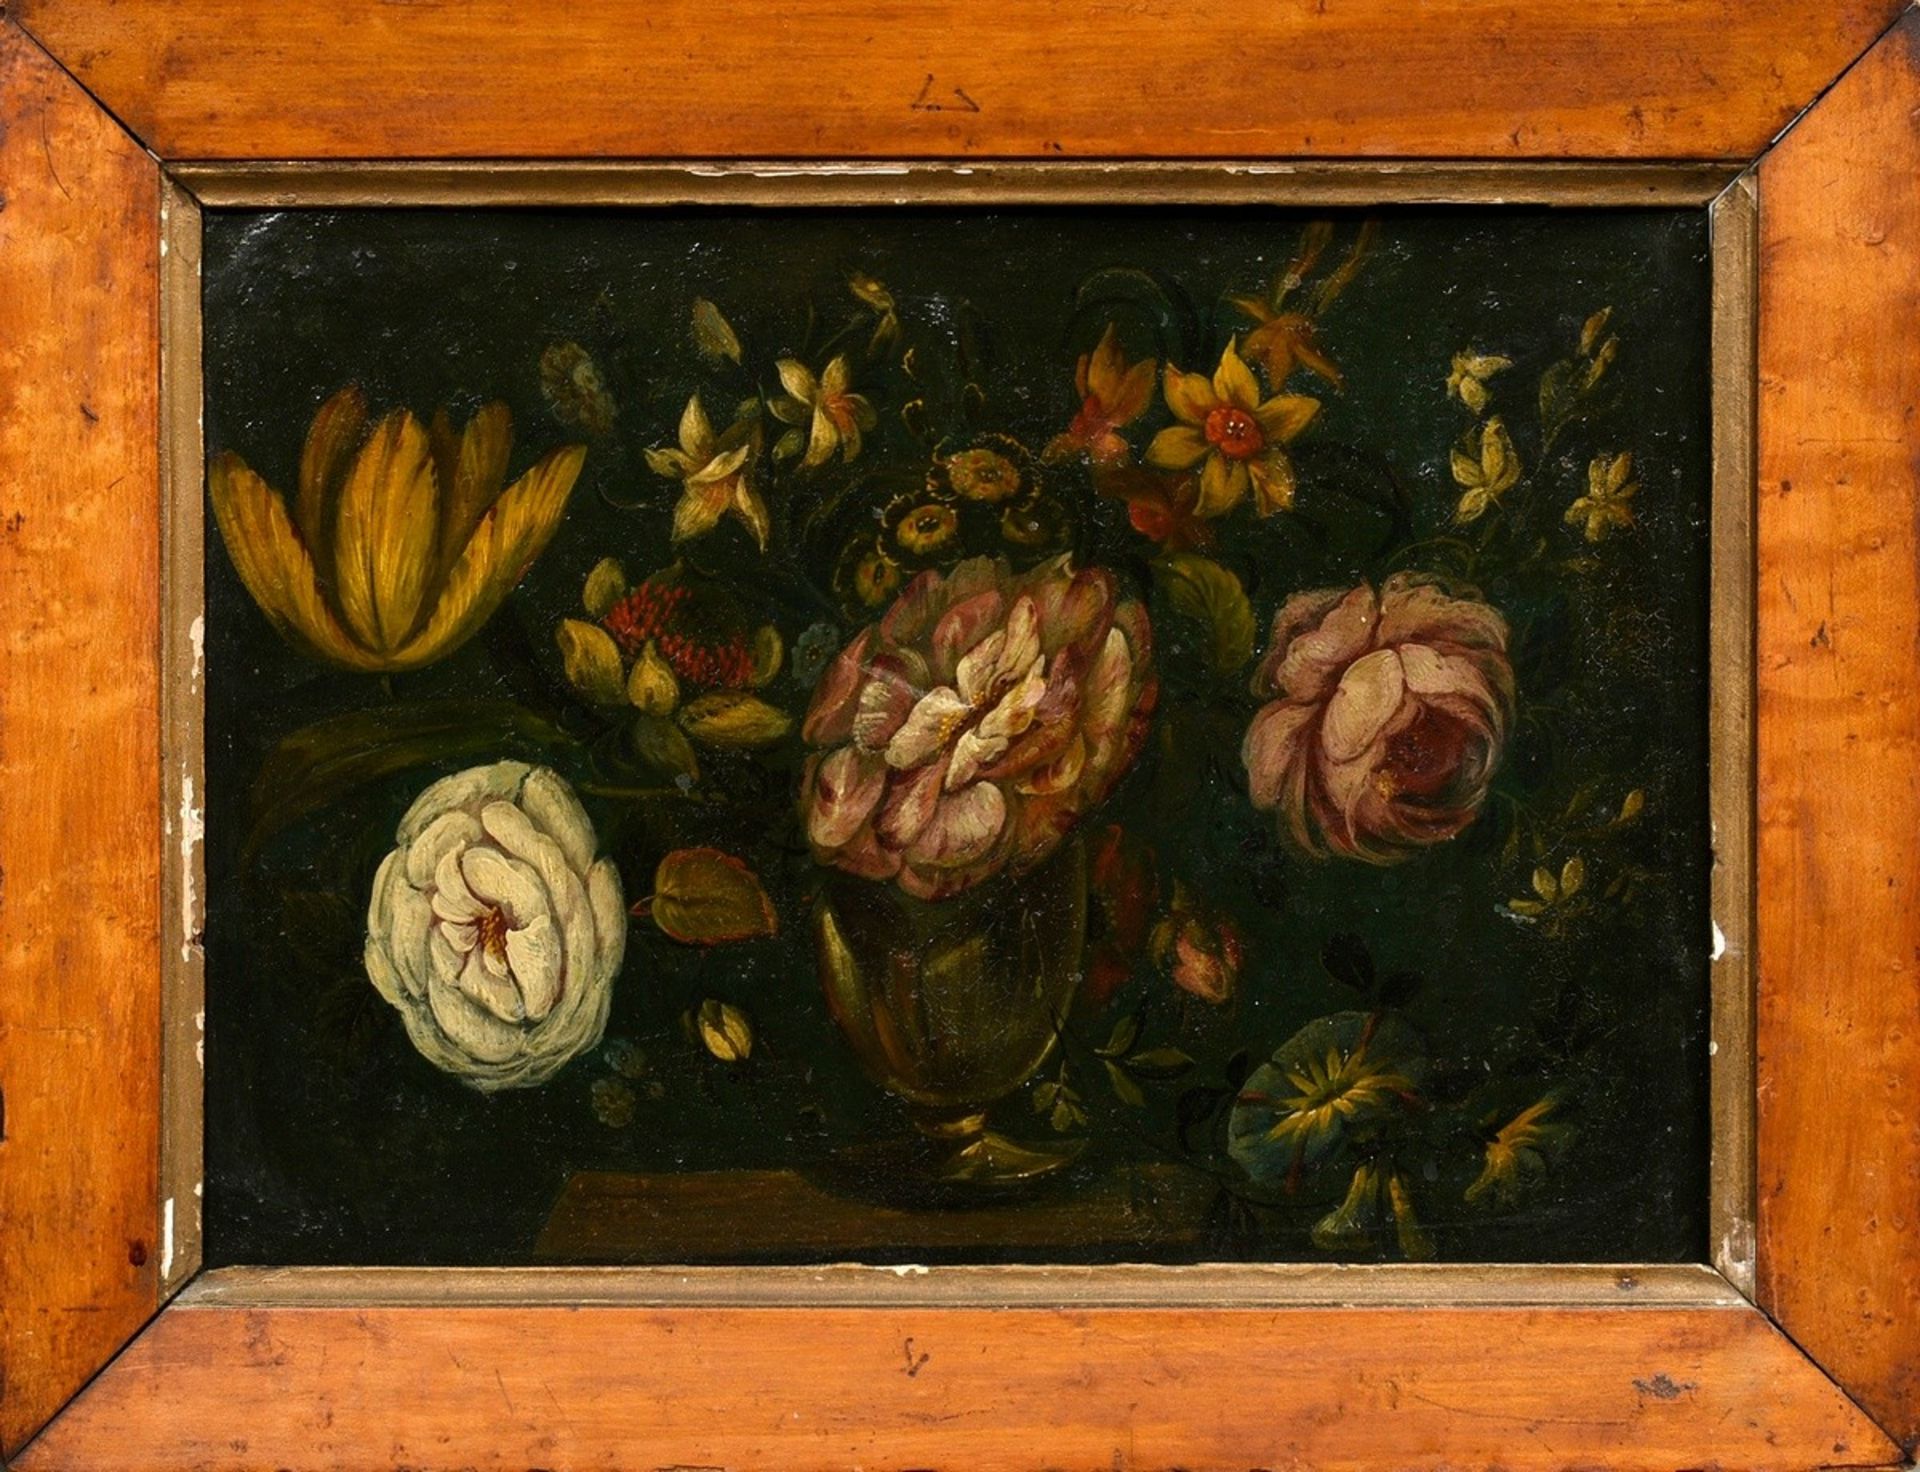 Unknown artist of the 18th c. "Flower still life in vase", oil/metal, 25,5x35,8cm (w.f. 33,5x44cm), - Image 2 of 3